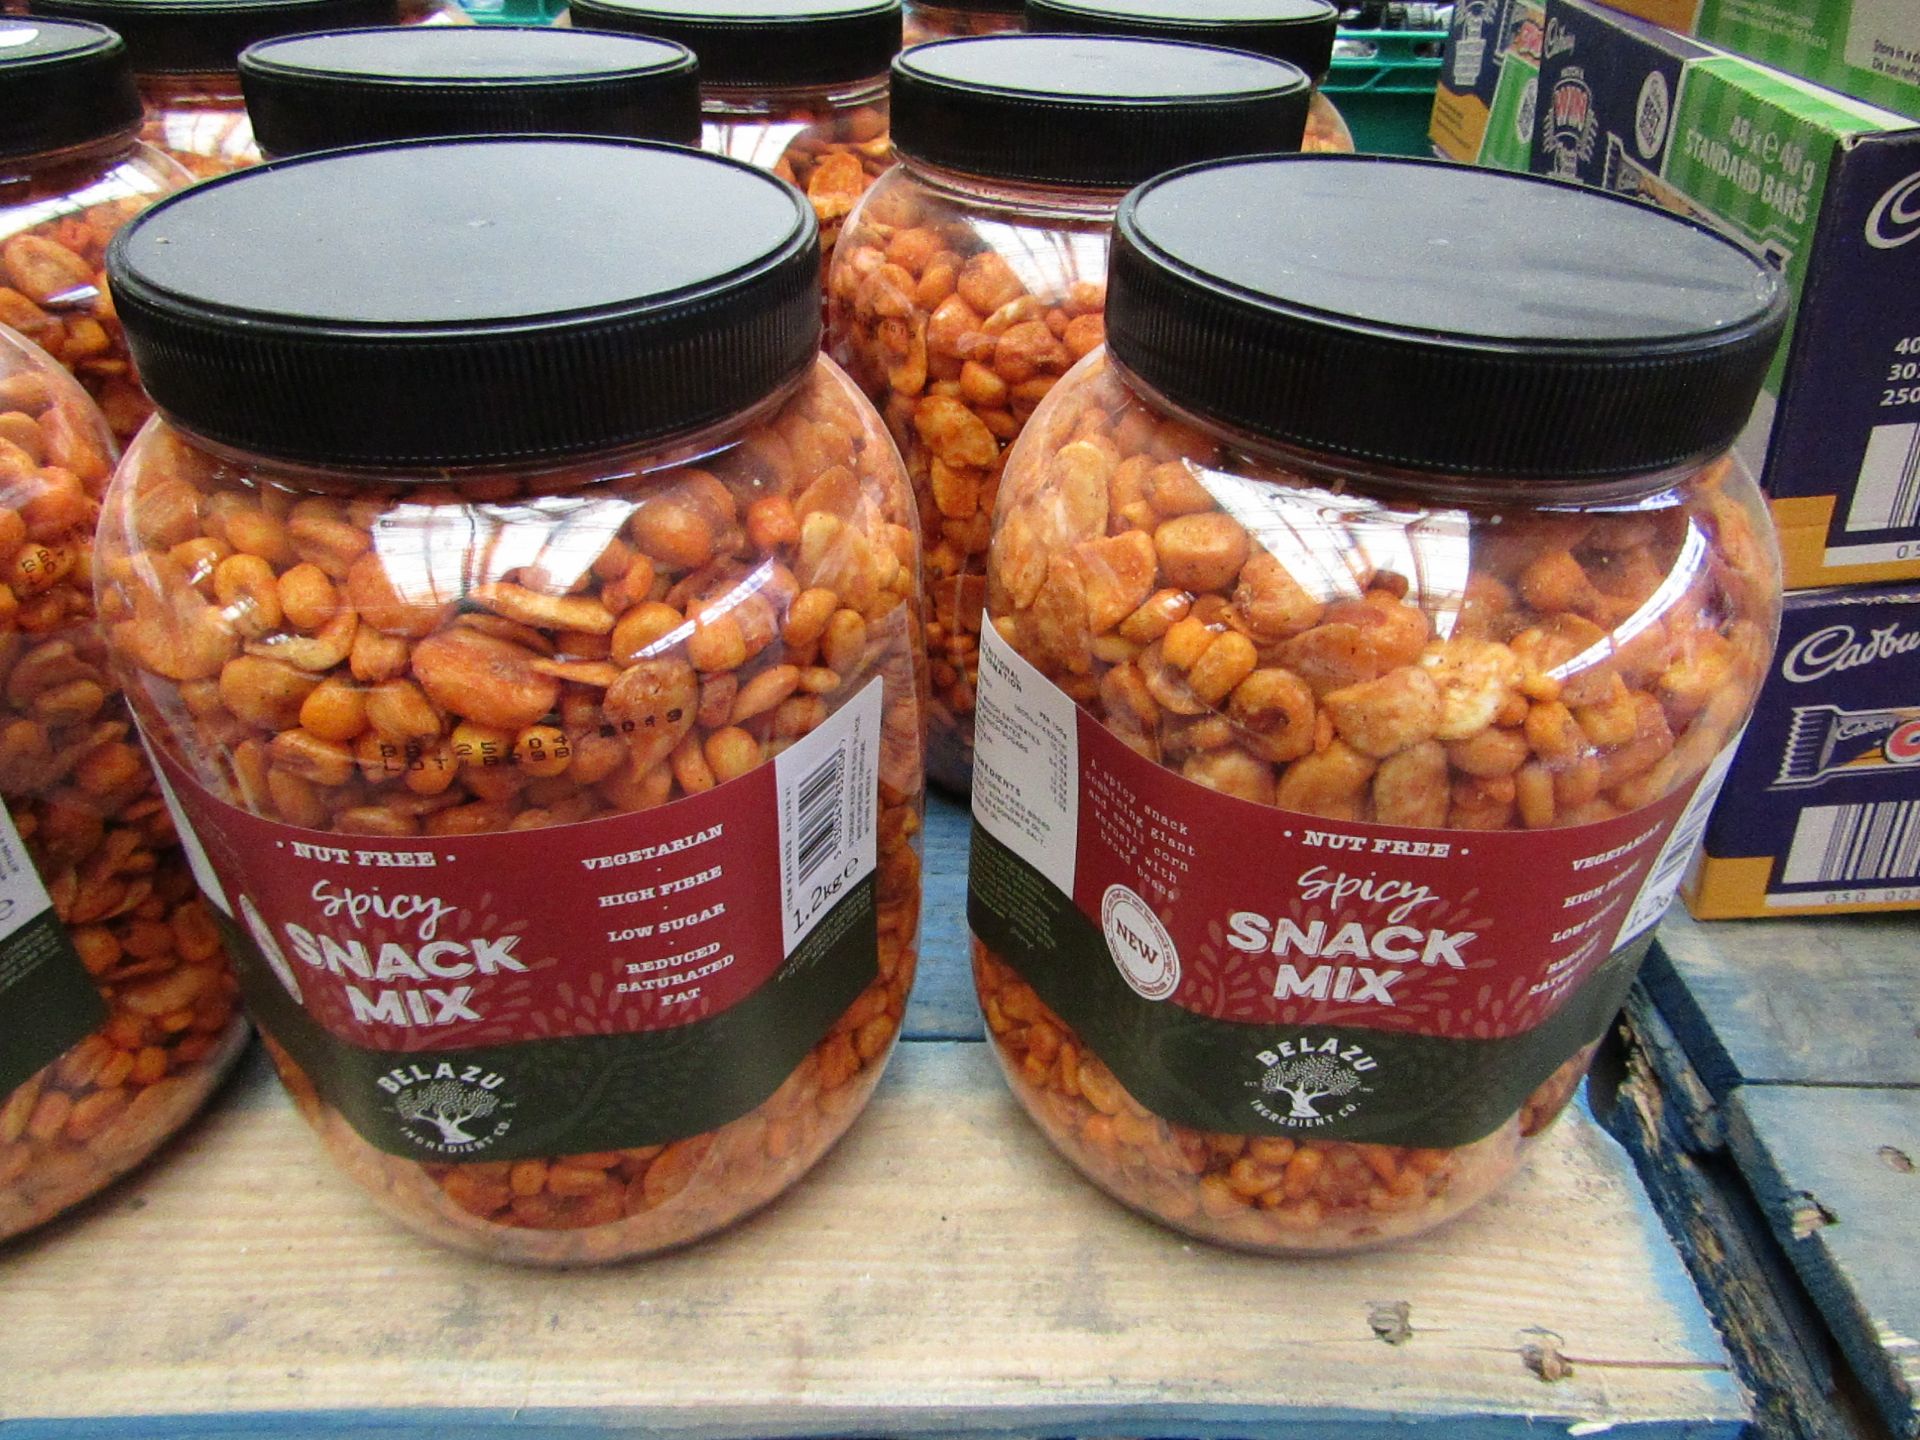 2x 1.2kg Tub of Nut free spicy snack mix, BBE 25/04/2019